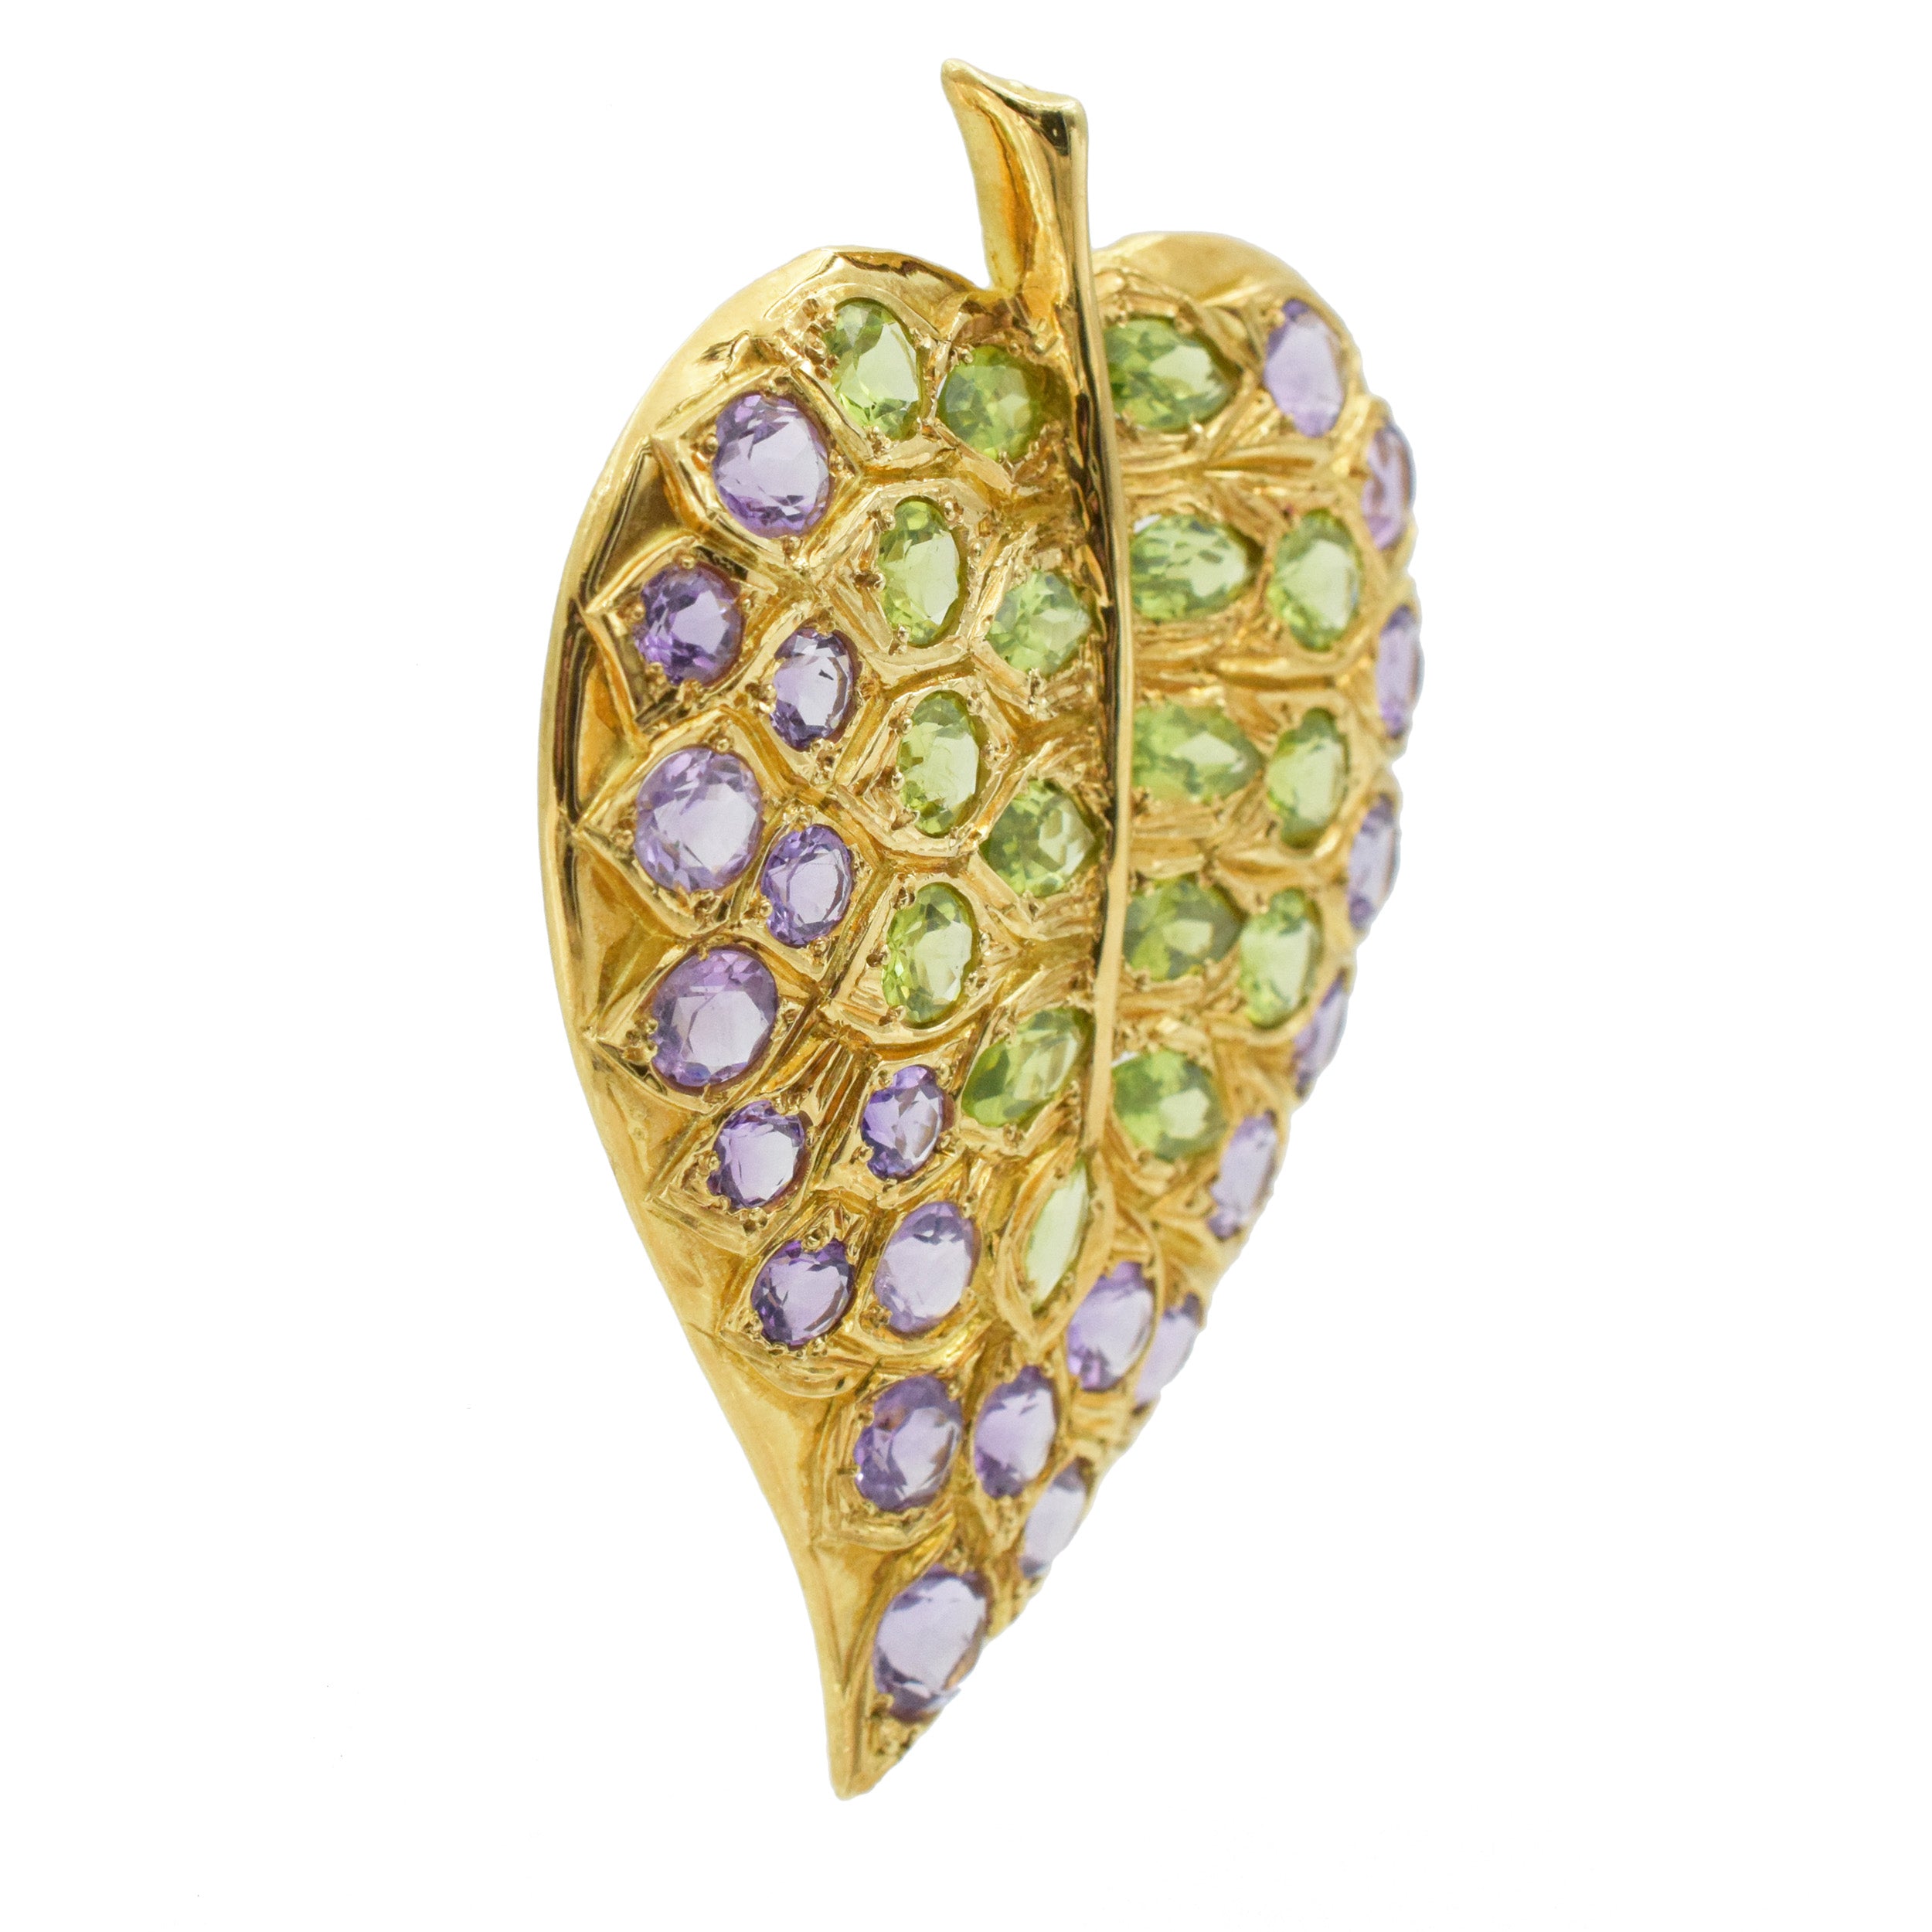 Pair of amethyst and peridot leaf brooches in 18k yellow gold.